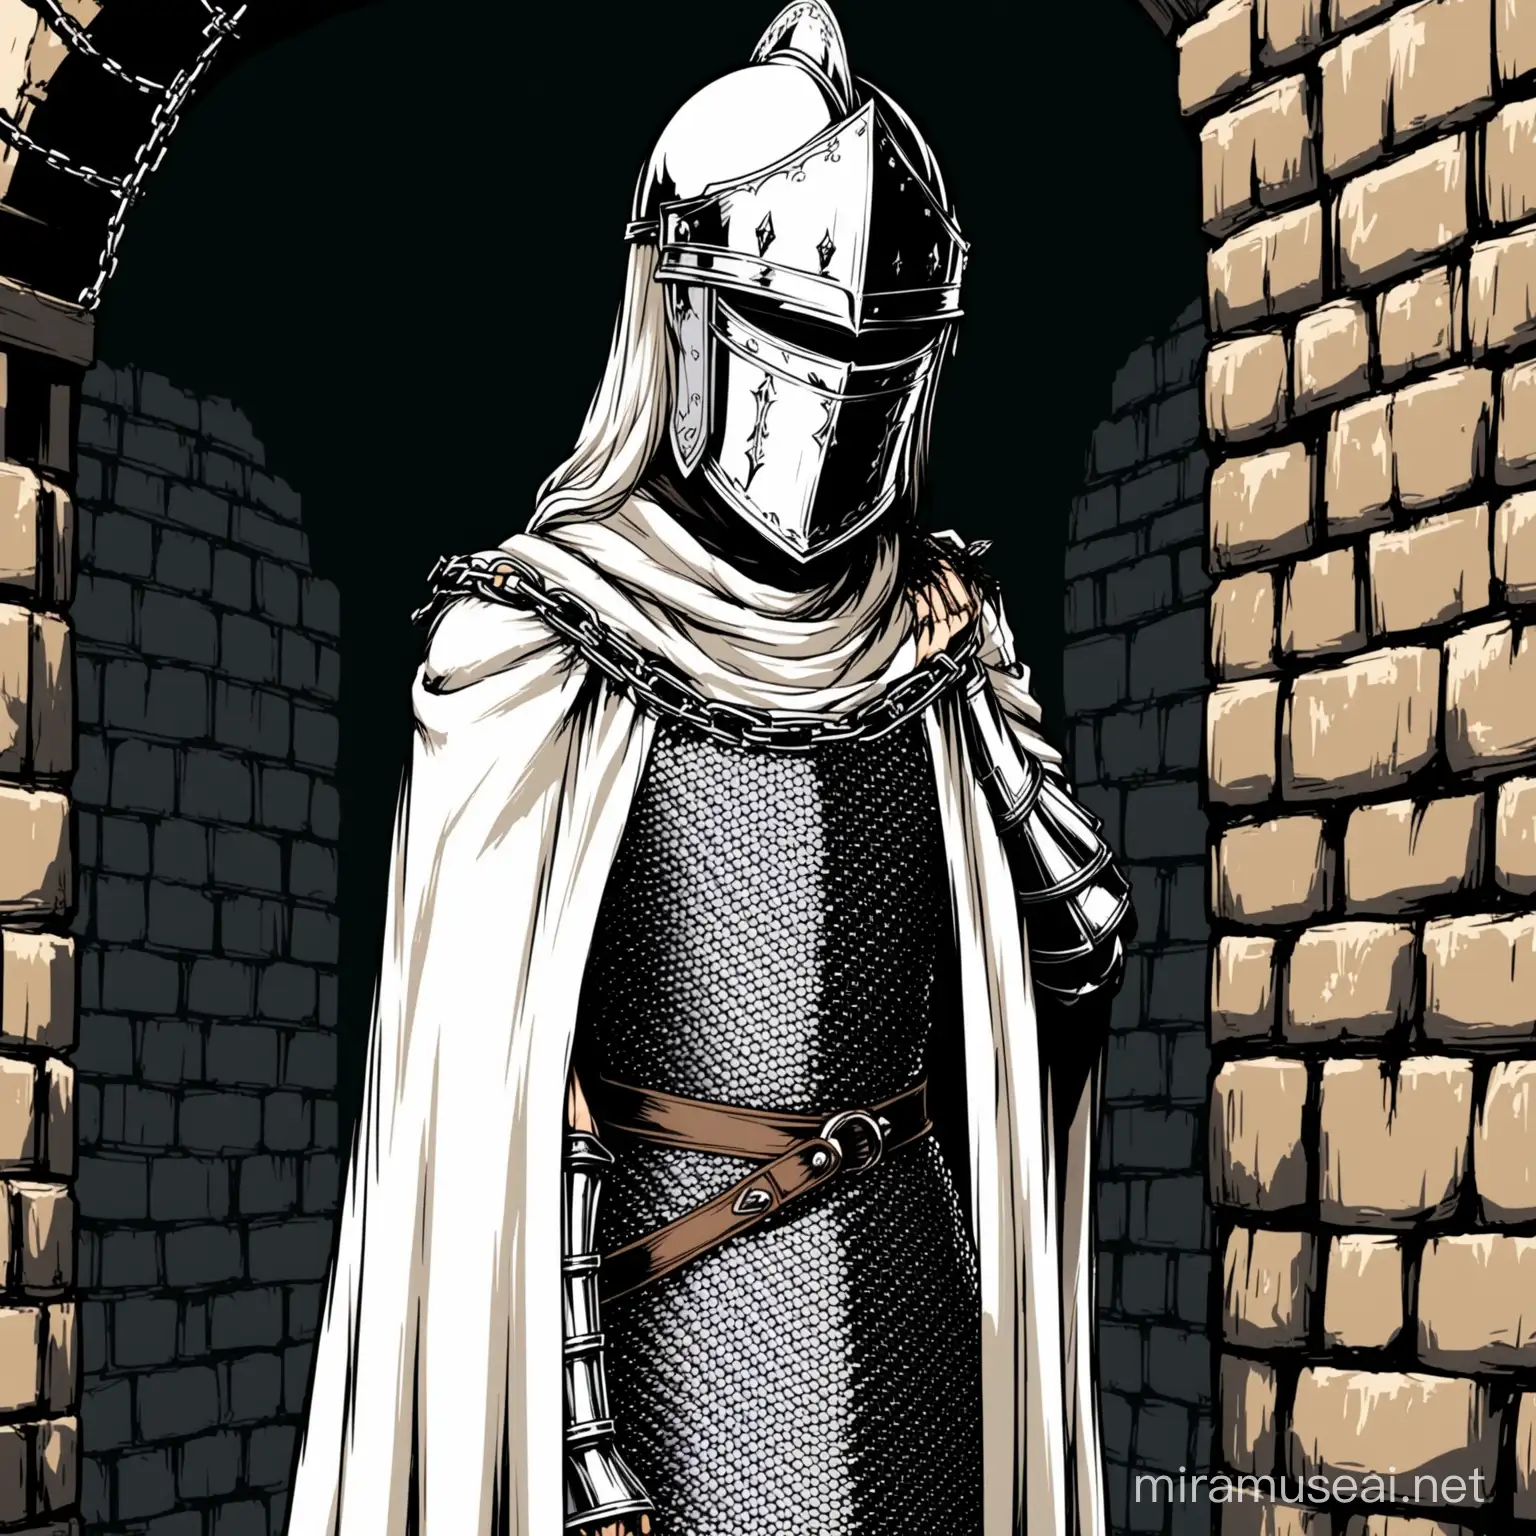 High detailed, Fantasy, Anime Style, Manga Style, Drawing, female knight, Helmet hiding face, chain mail, slim body, white tabard over chain mail, famine look poor look, pretending be a man tavern on the background.